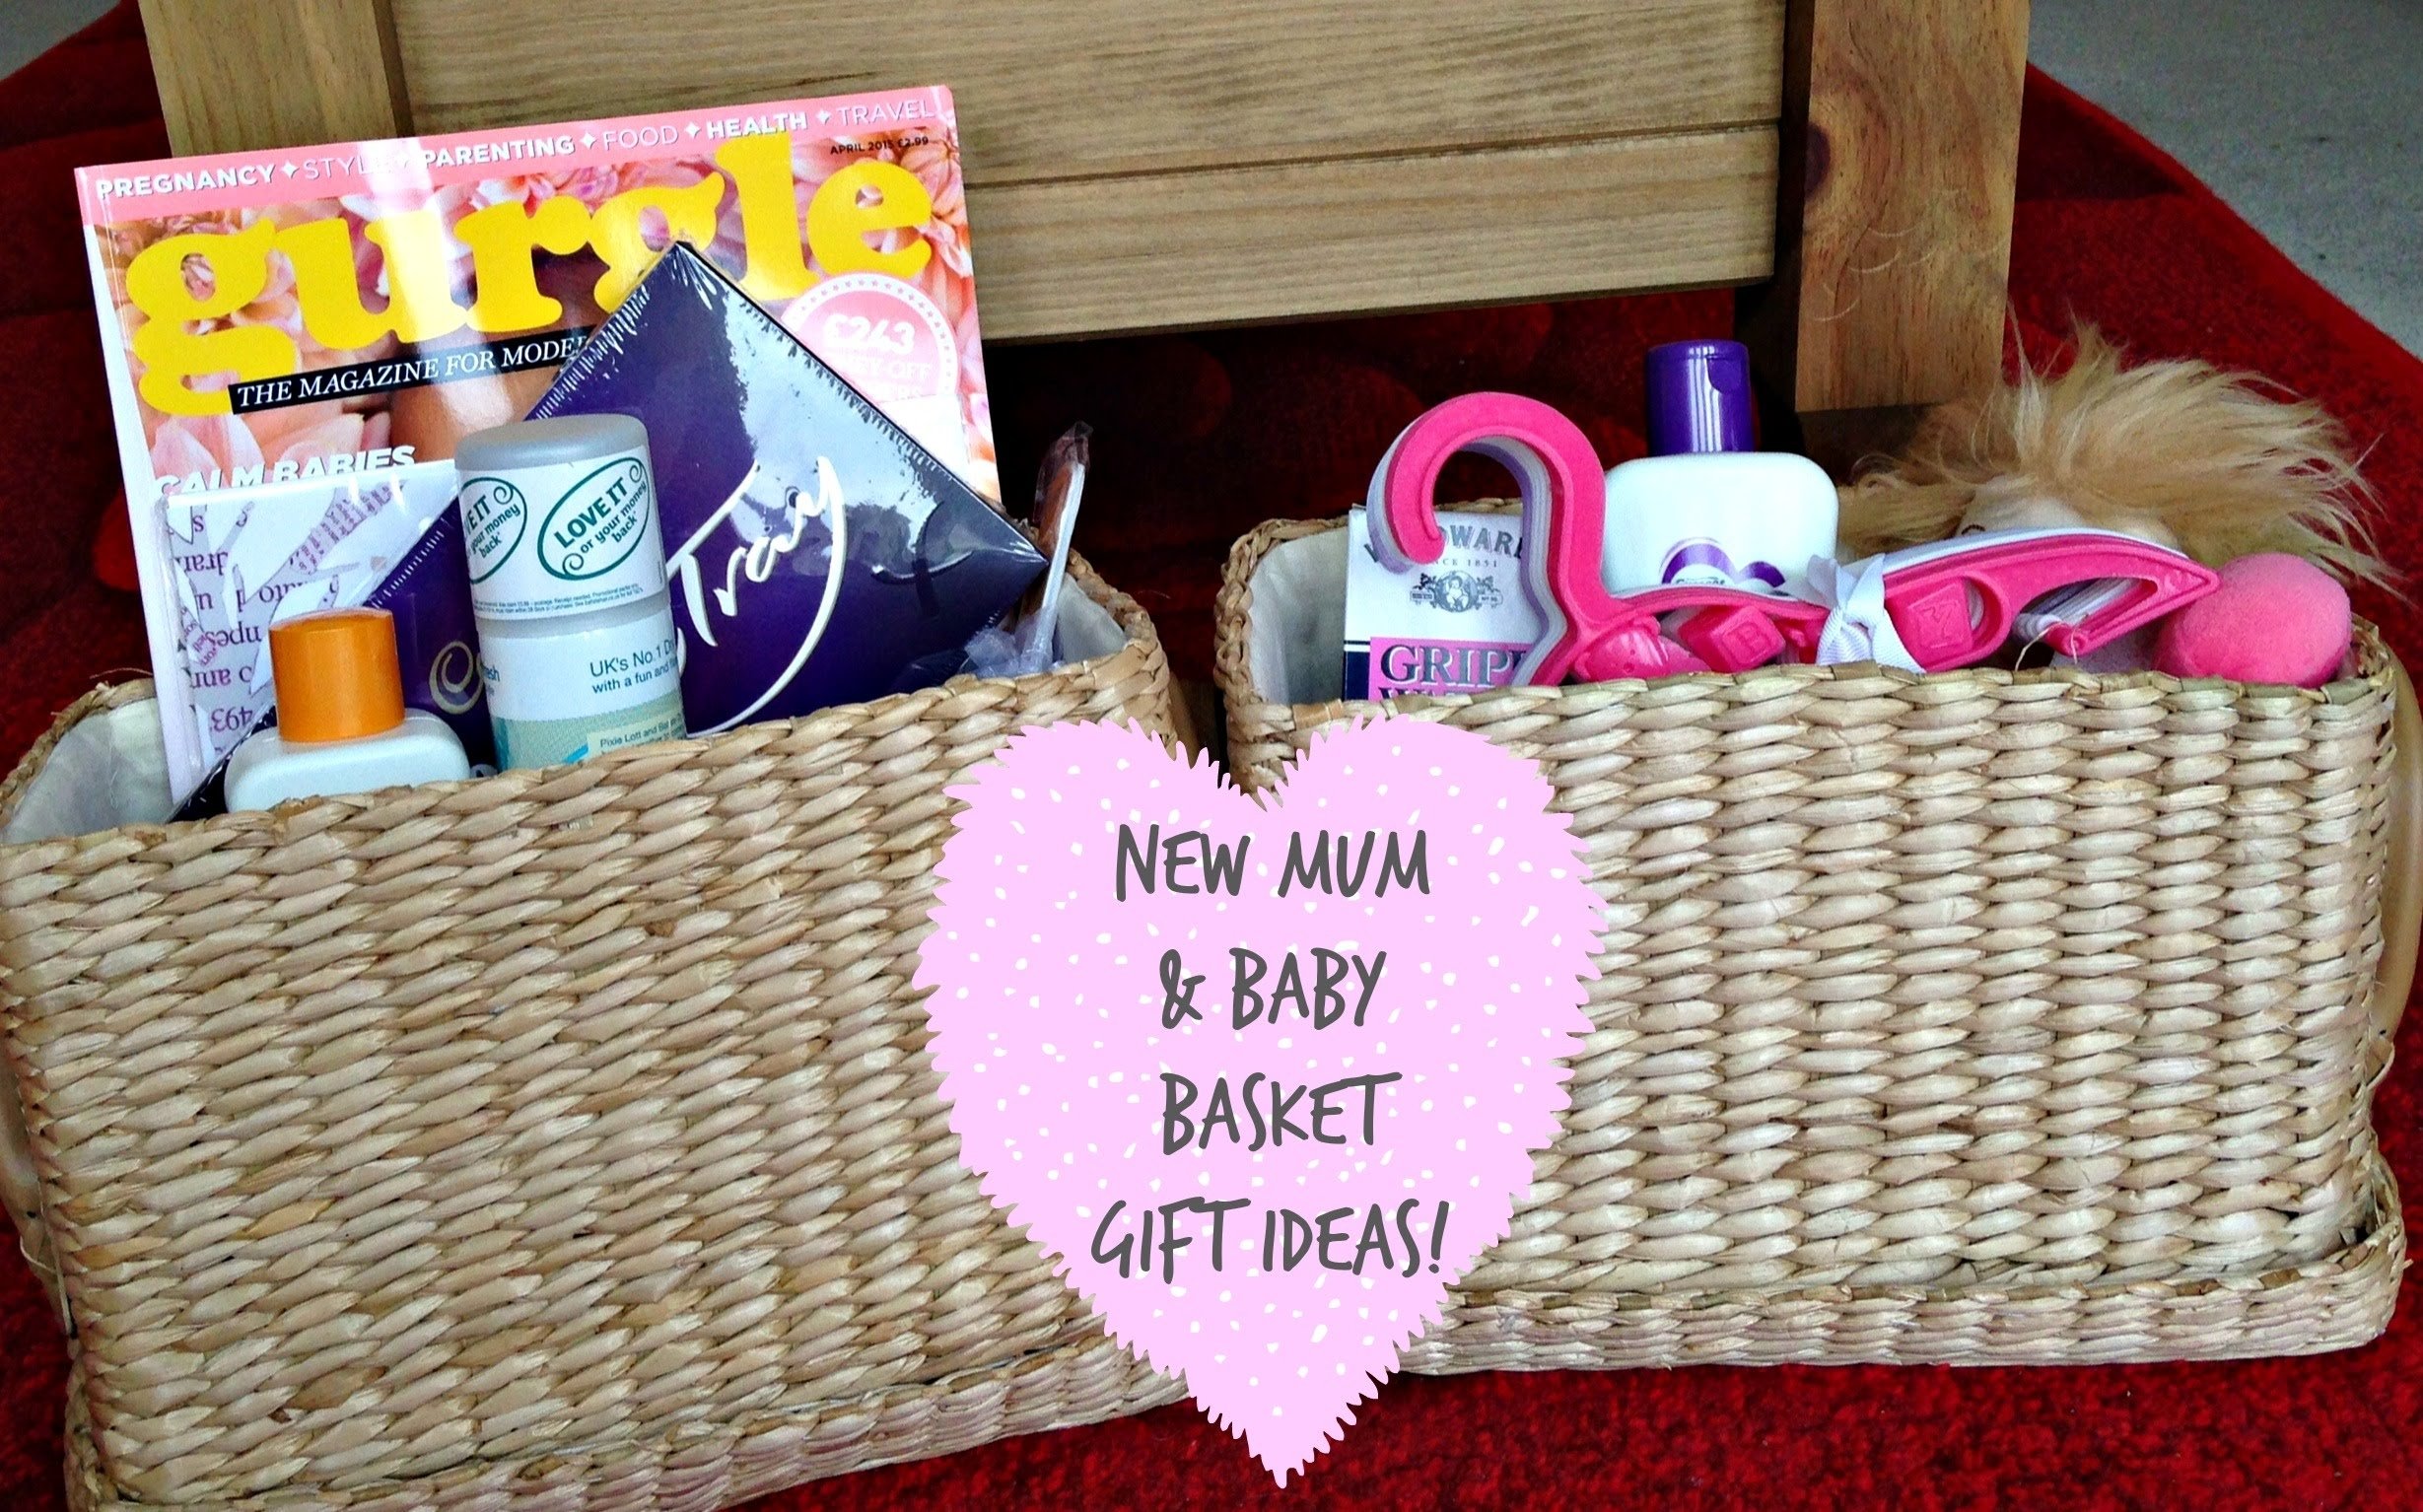 10 Most Recommended Gift Ideas For A New Mom new mum baby basket gift ideas kerry dyer youtube 5 2022